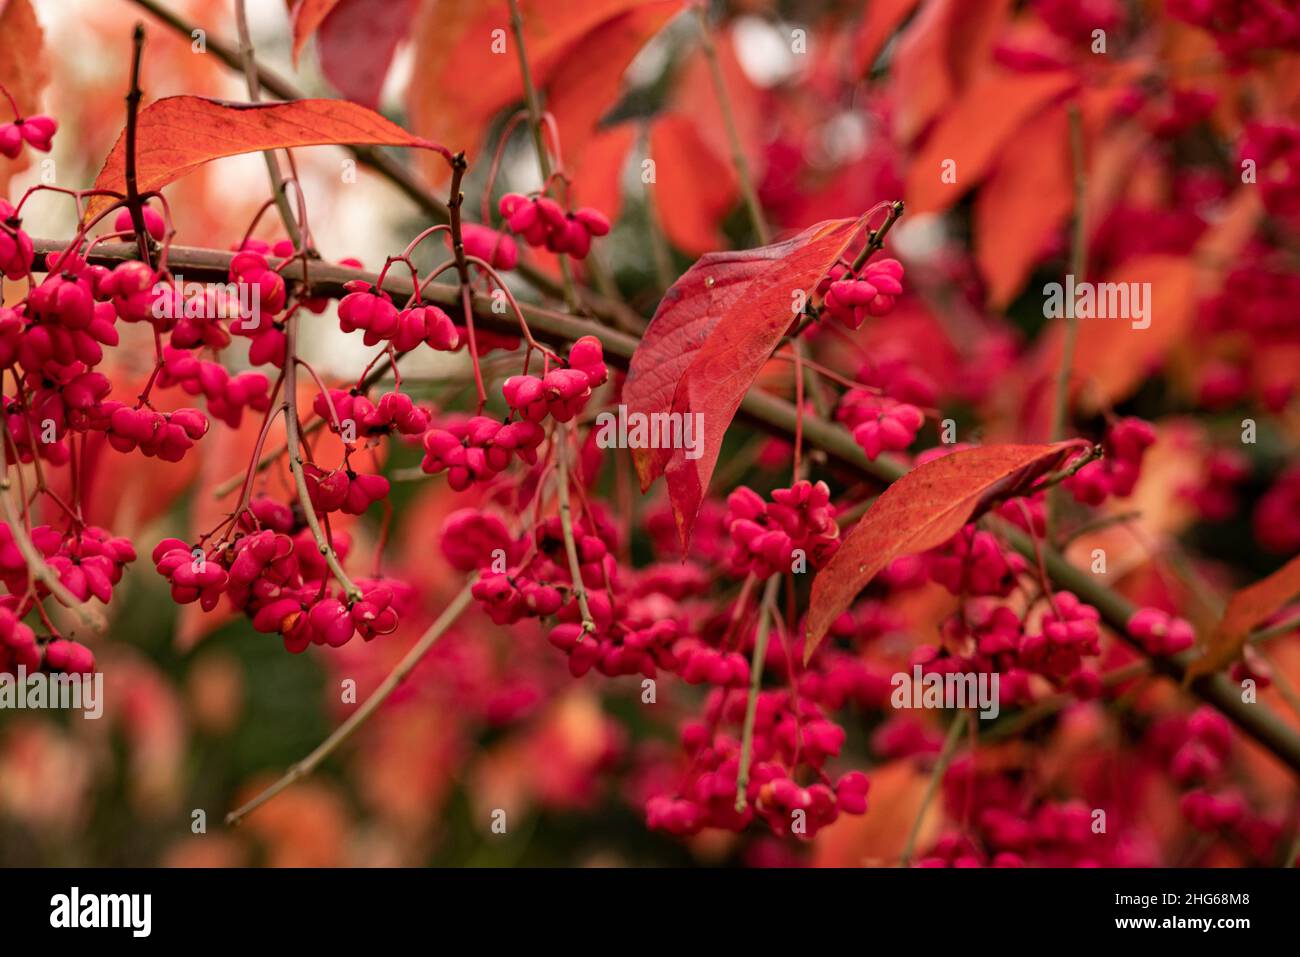 Full frame close-up of a spindle tree or common spindle (Euonymus europaeus), shining in bright red and pink colors in autumn, Weser Uplands, Germany Stock Photo